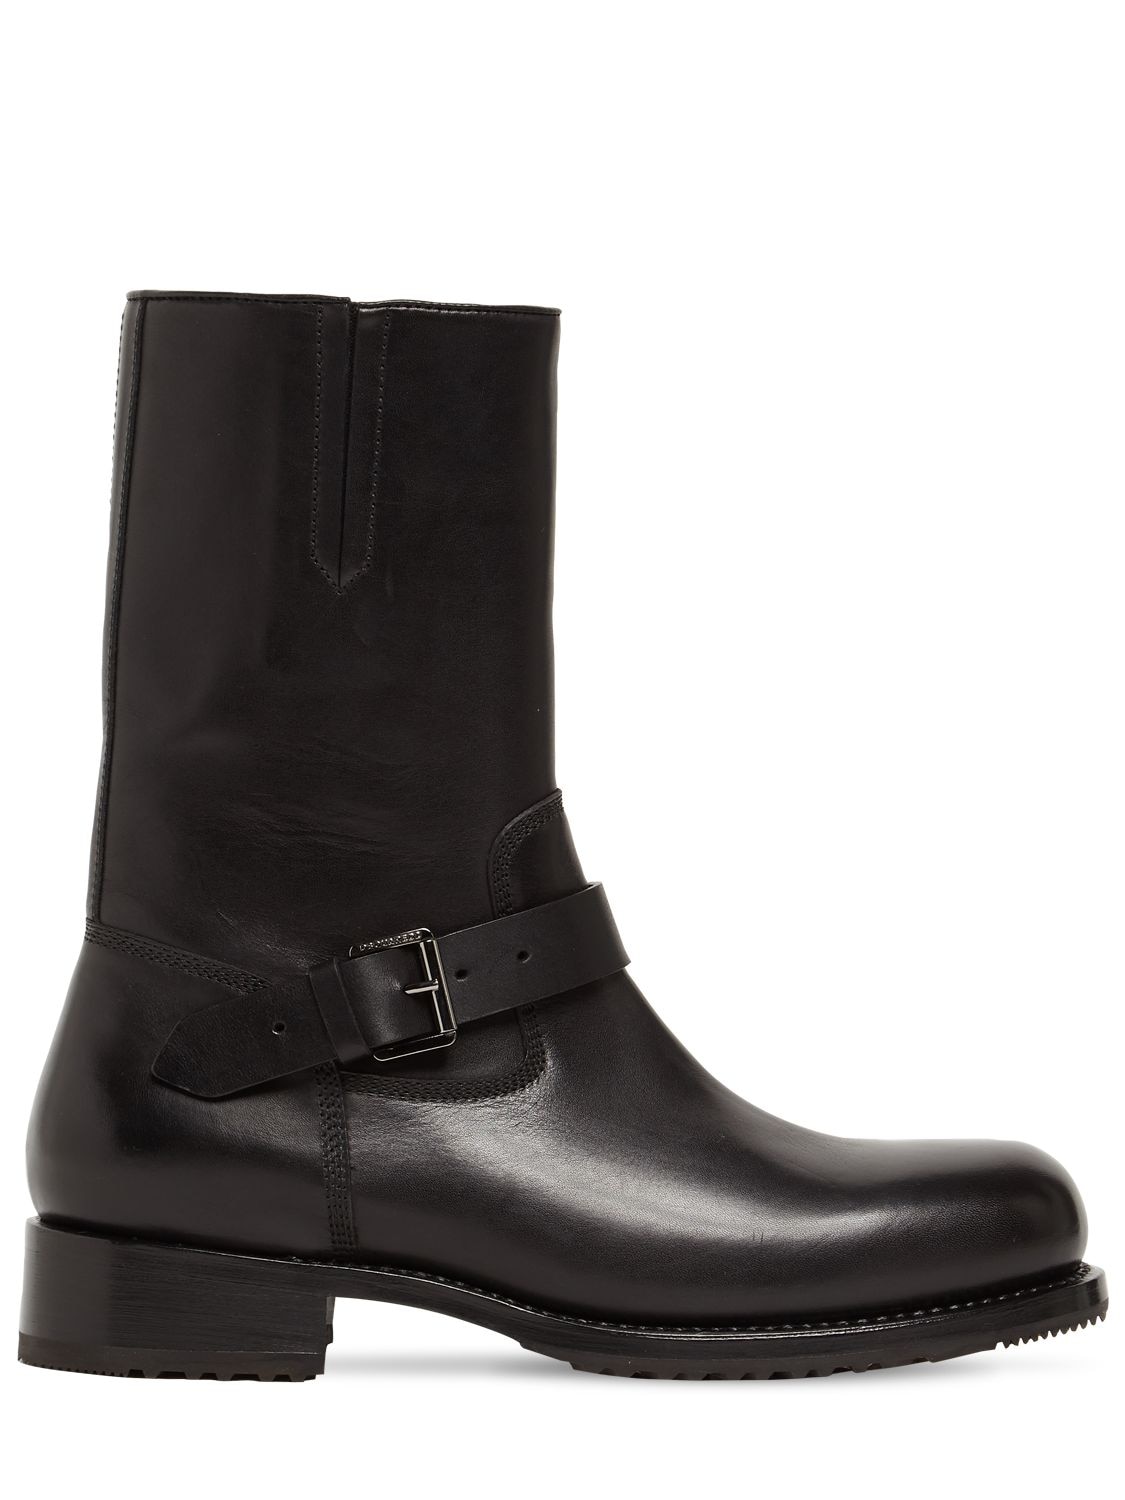 DSQUARED2 ZIP LEATHER RIDER BOOTS,74IGH4004-MJEYNA2